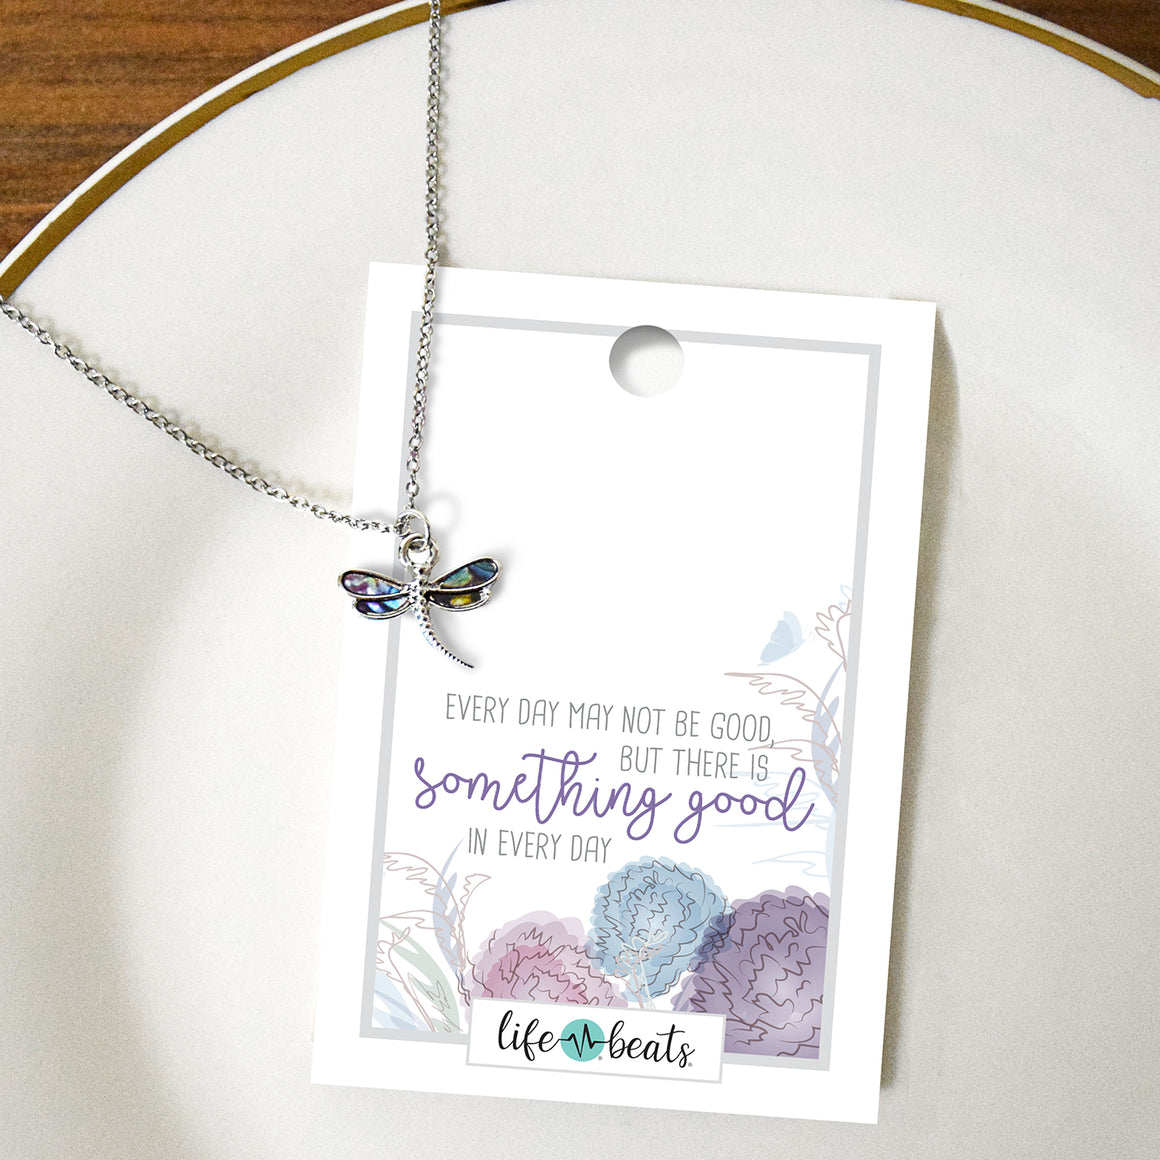 Good Day Everyday - Dainty Dragonfly Necklace